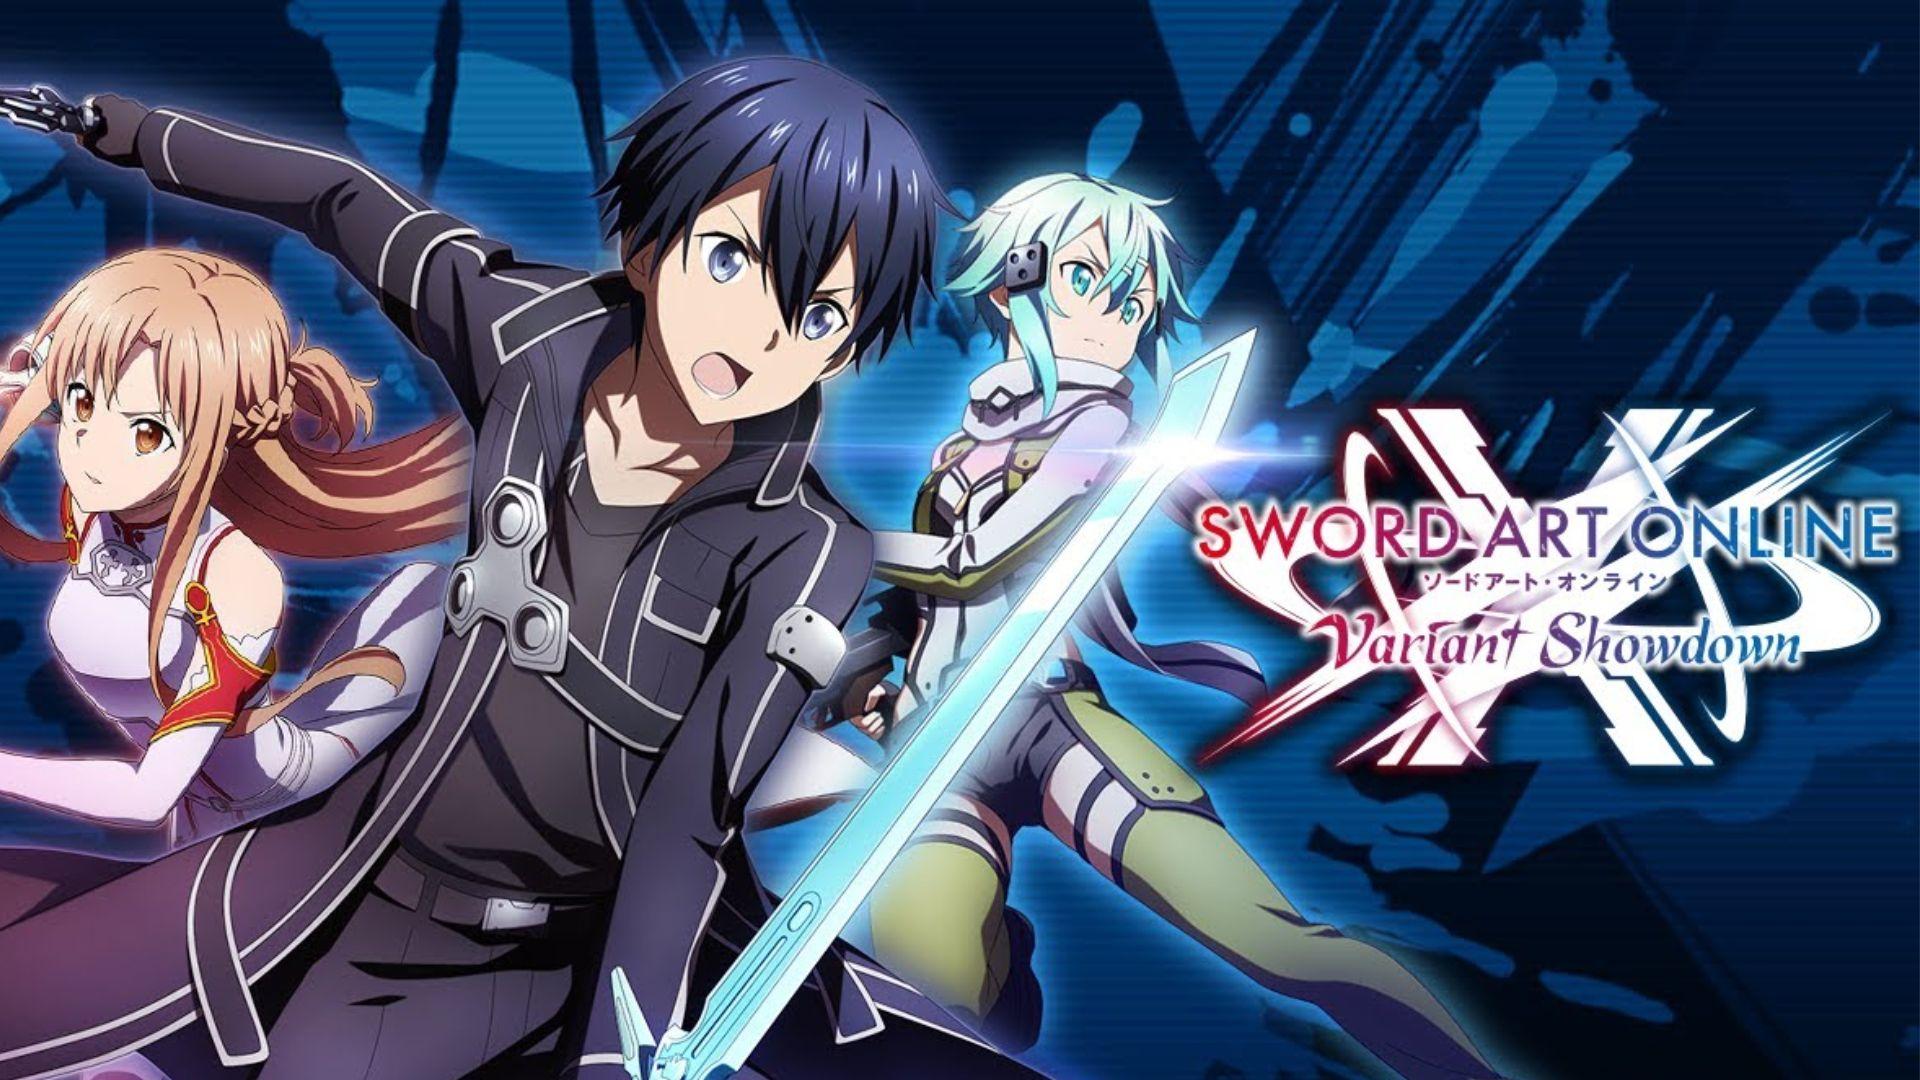 Sword Art Online - Variant Showdown Tips and Tricks to Be a Pro